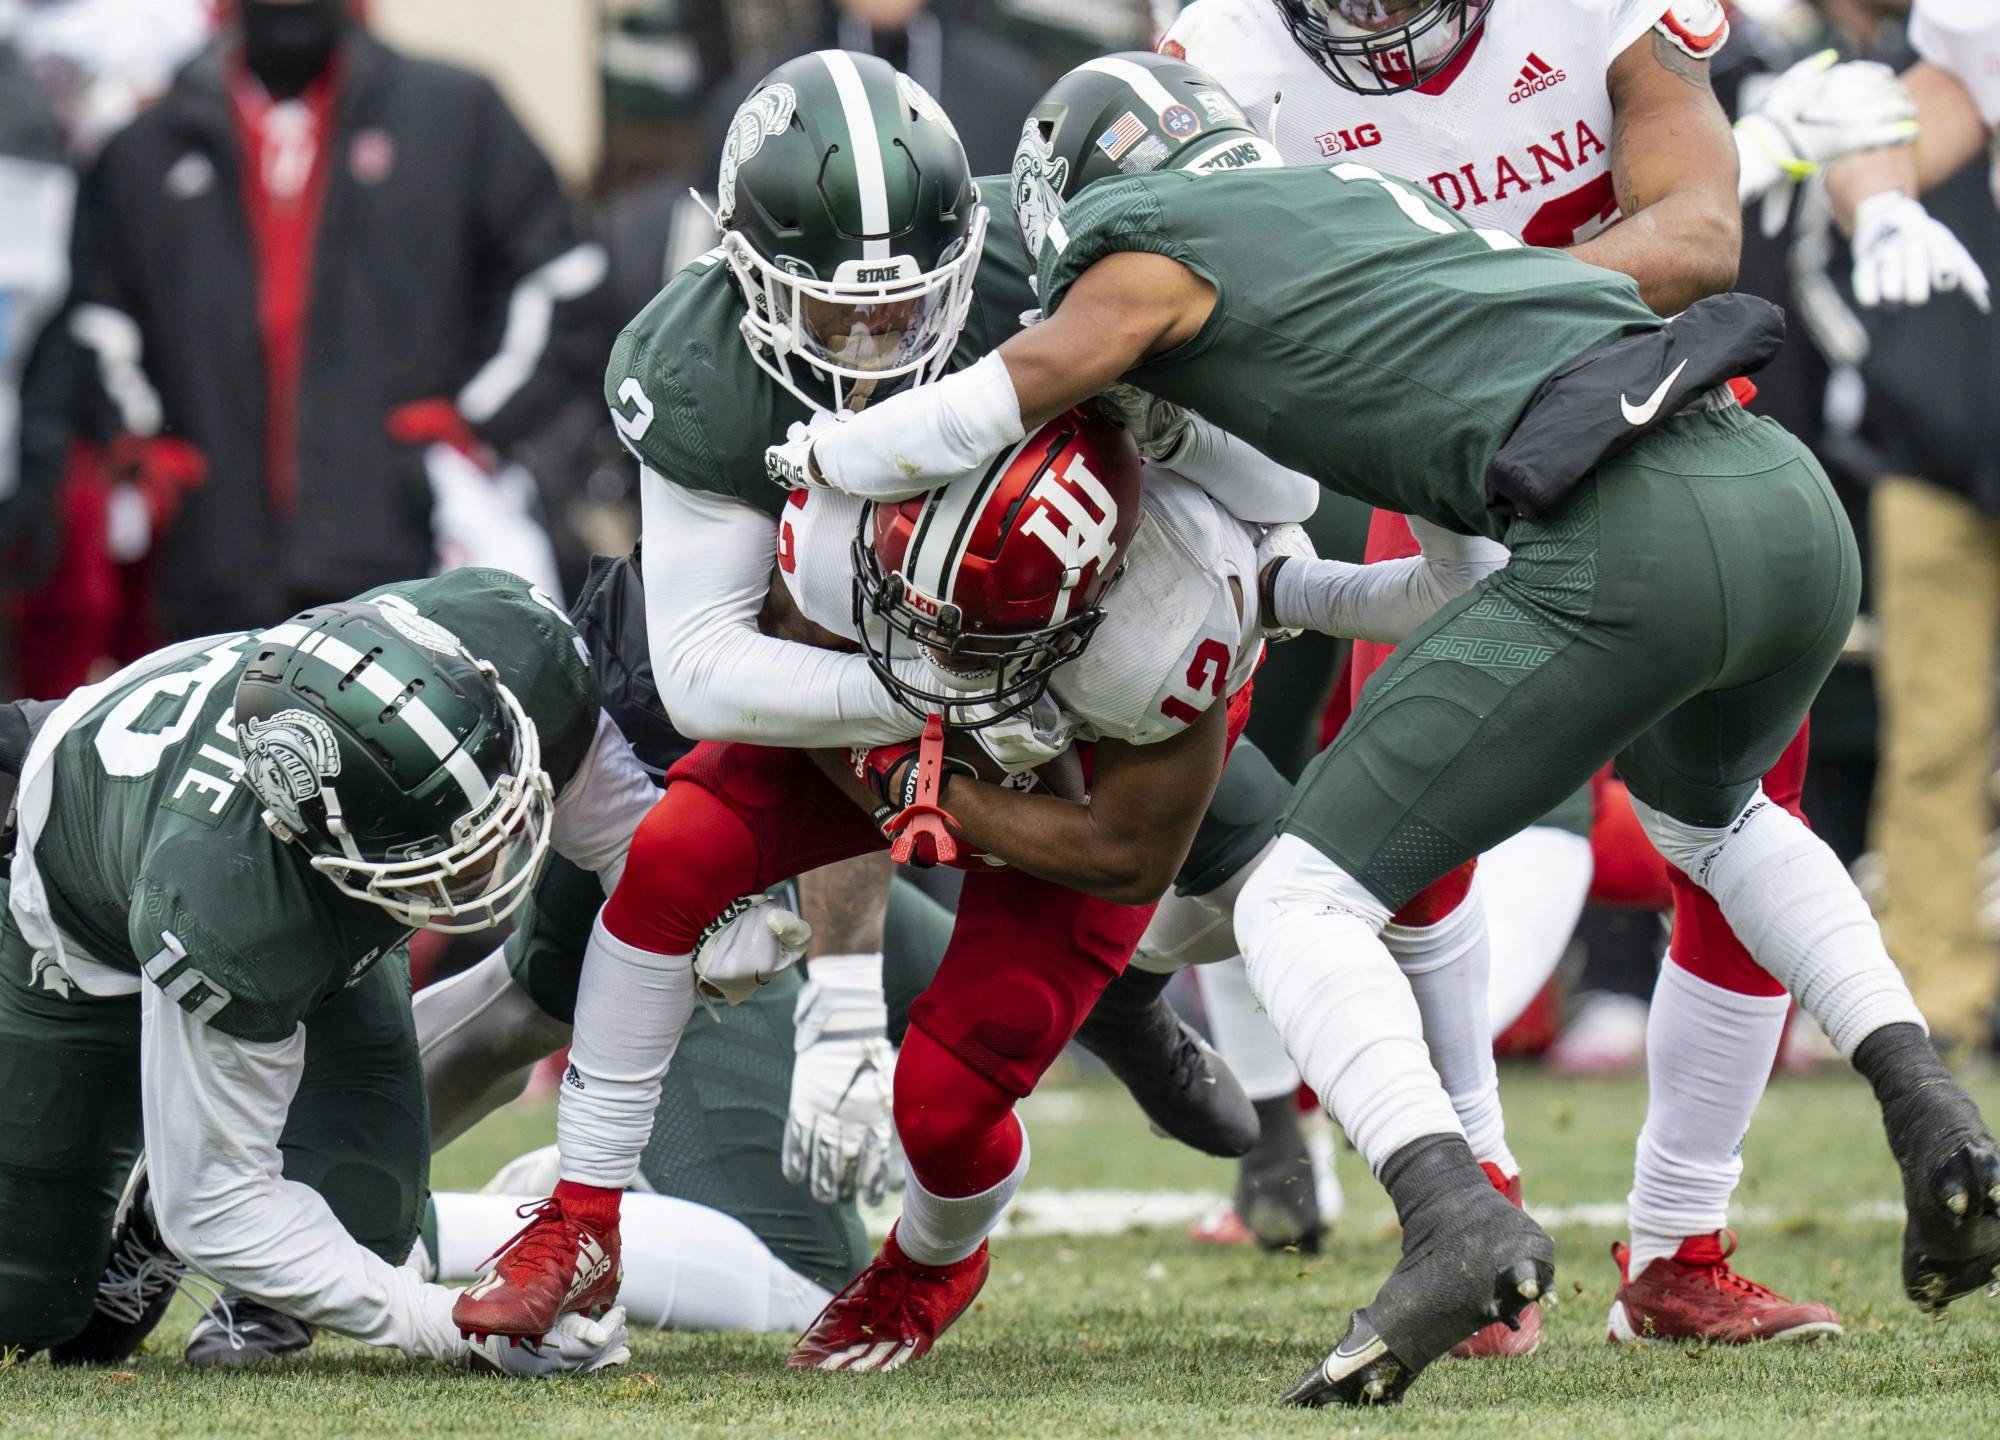 Senior defensive end Khris Bogle, 2, and freshman safety Jaden Mangham, 1, stop Jaylin Lucas, 12, during Michigan State’s last game at home against Indiana on Saturday, Nov. 19, 2022 at Spartan Stadium. Indiana ultimately beat the Spartans, 39-31.